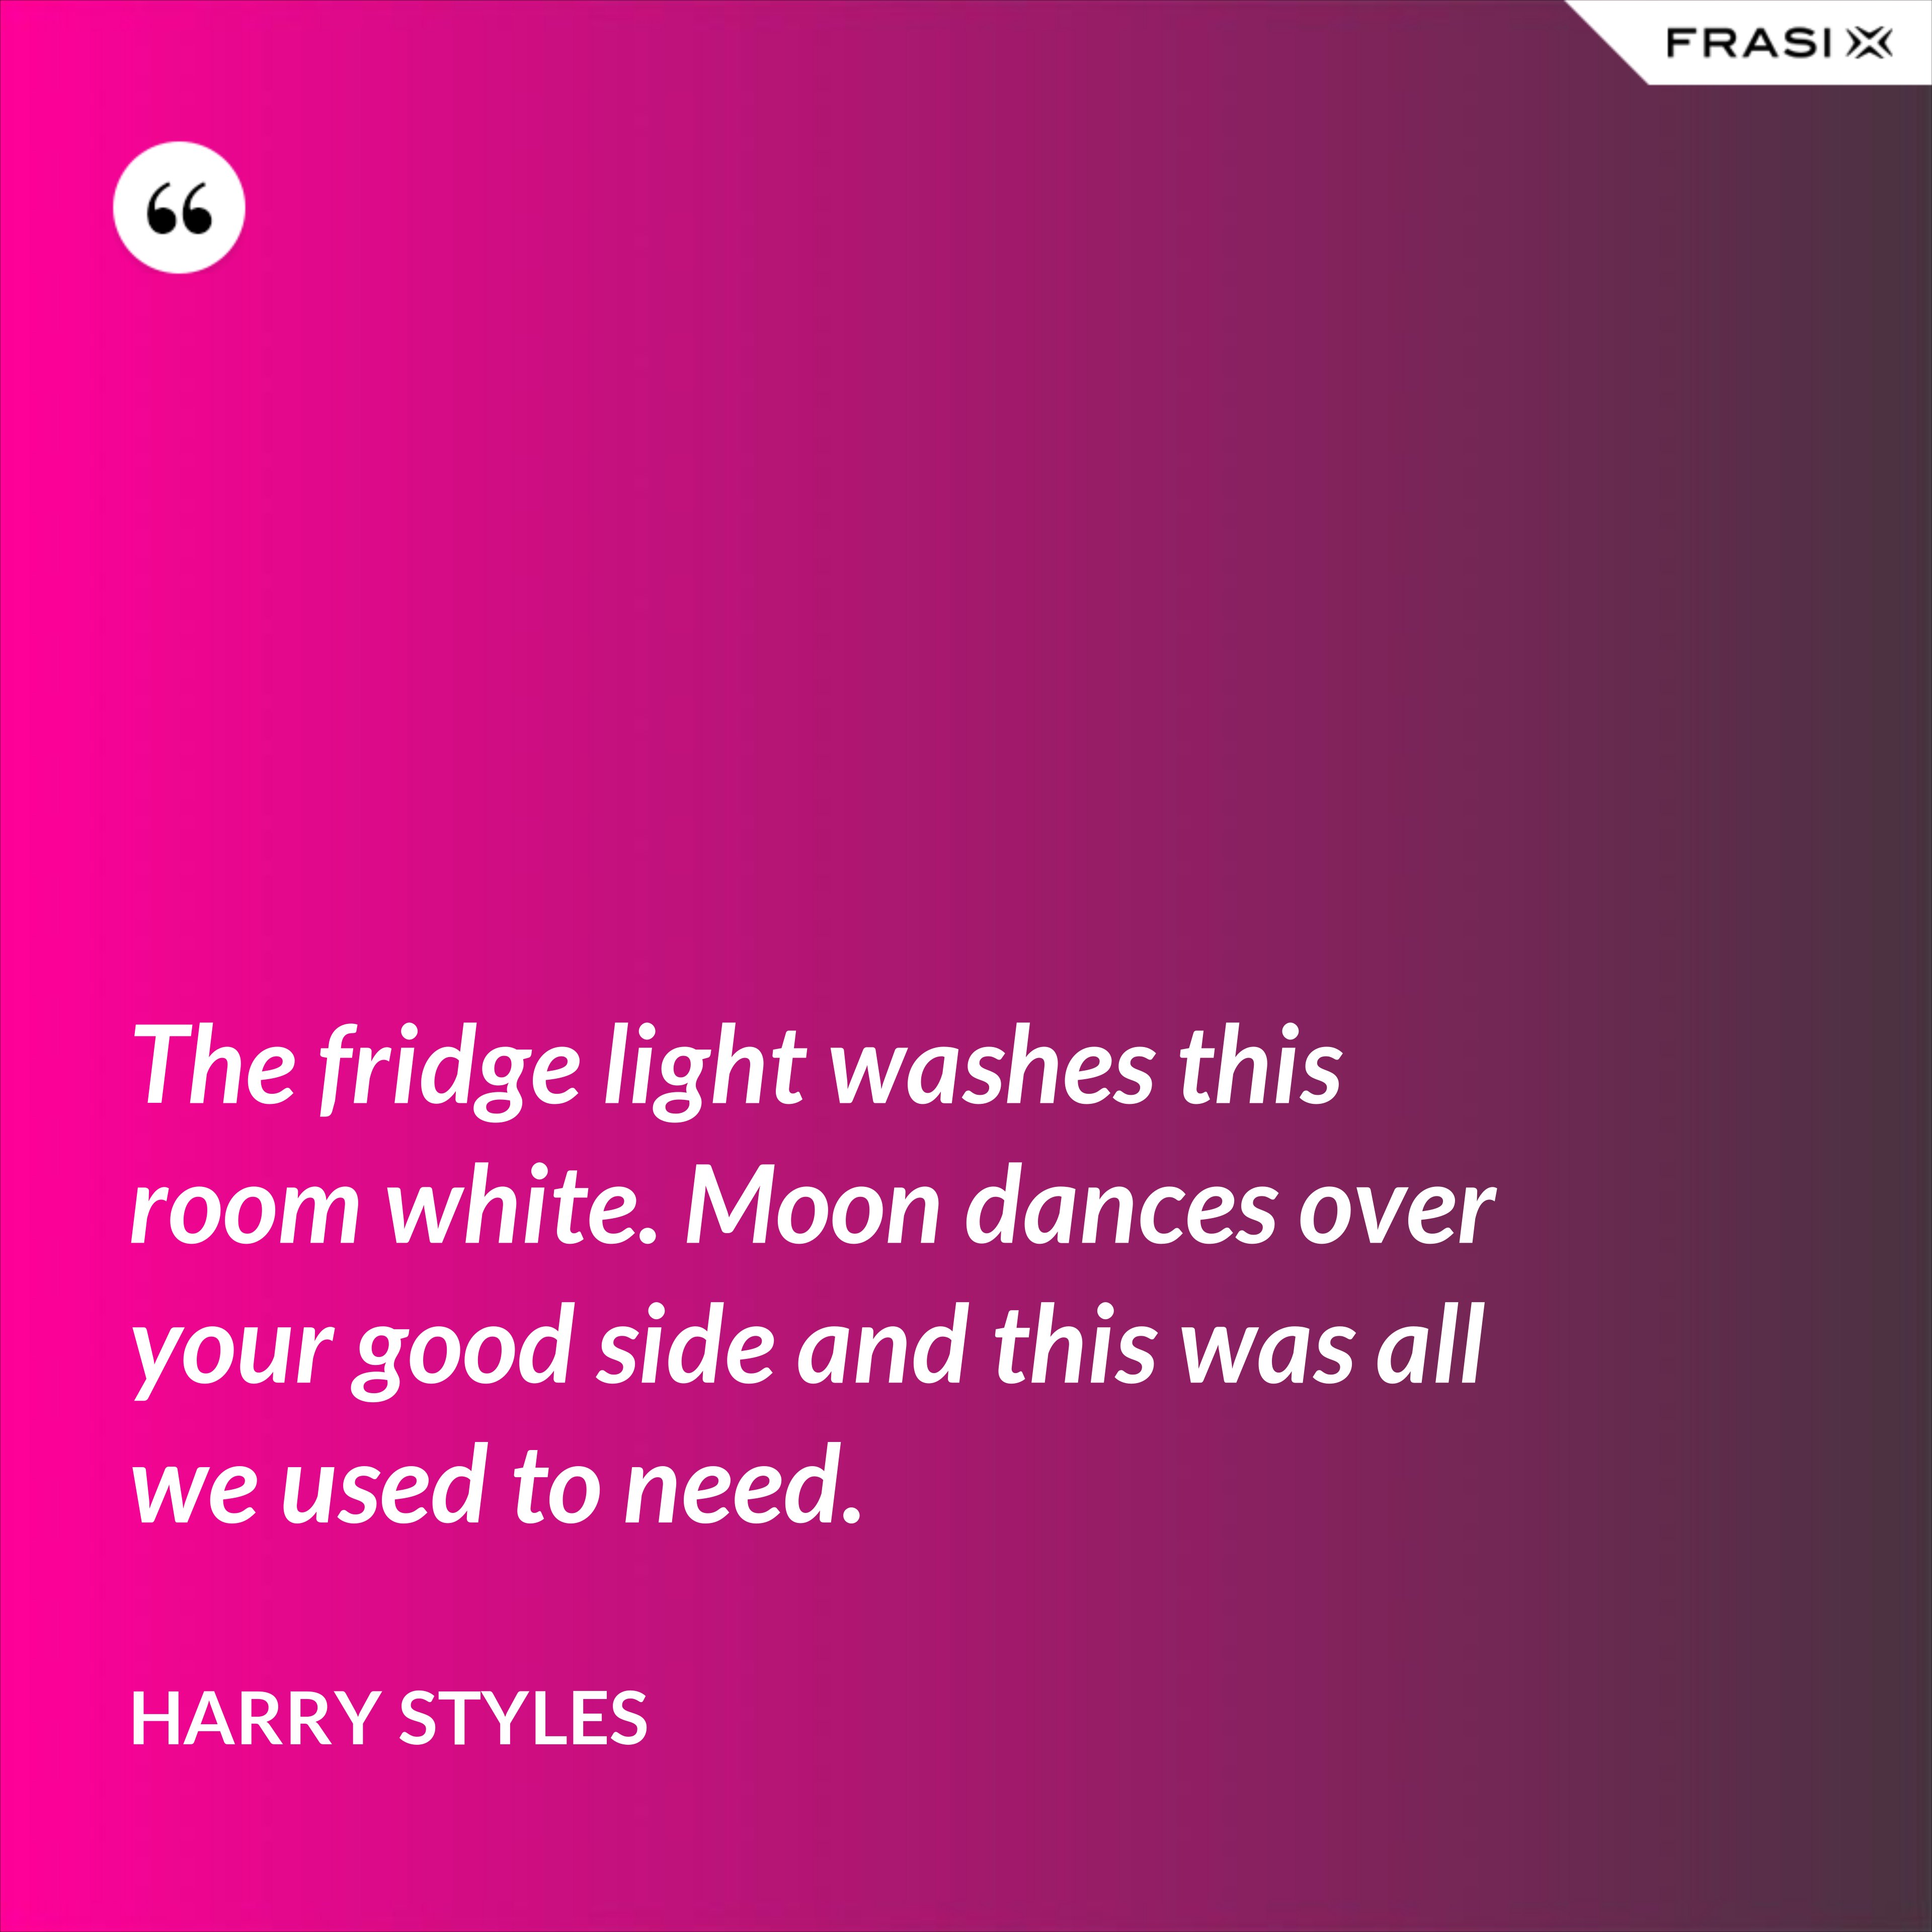 The fridge light washes this room white. Moon dances over your good side and this was all we used to need. - Harry Styles